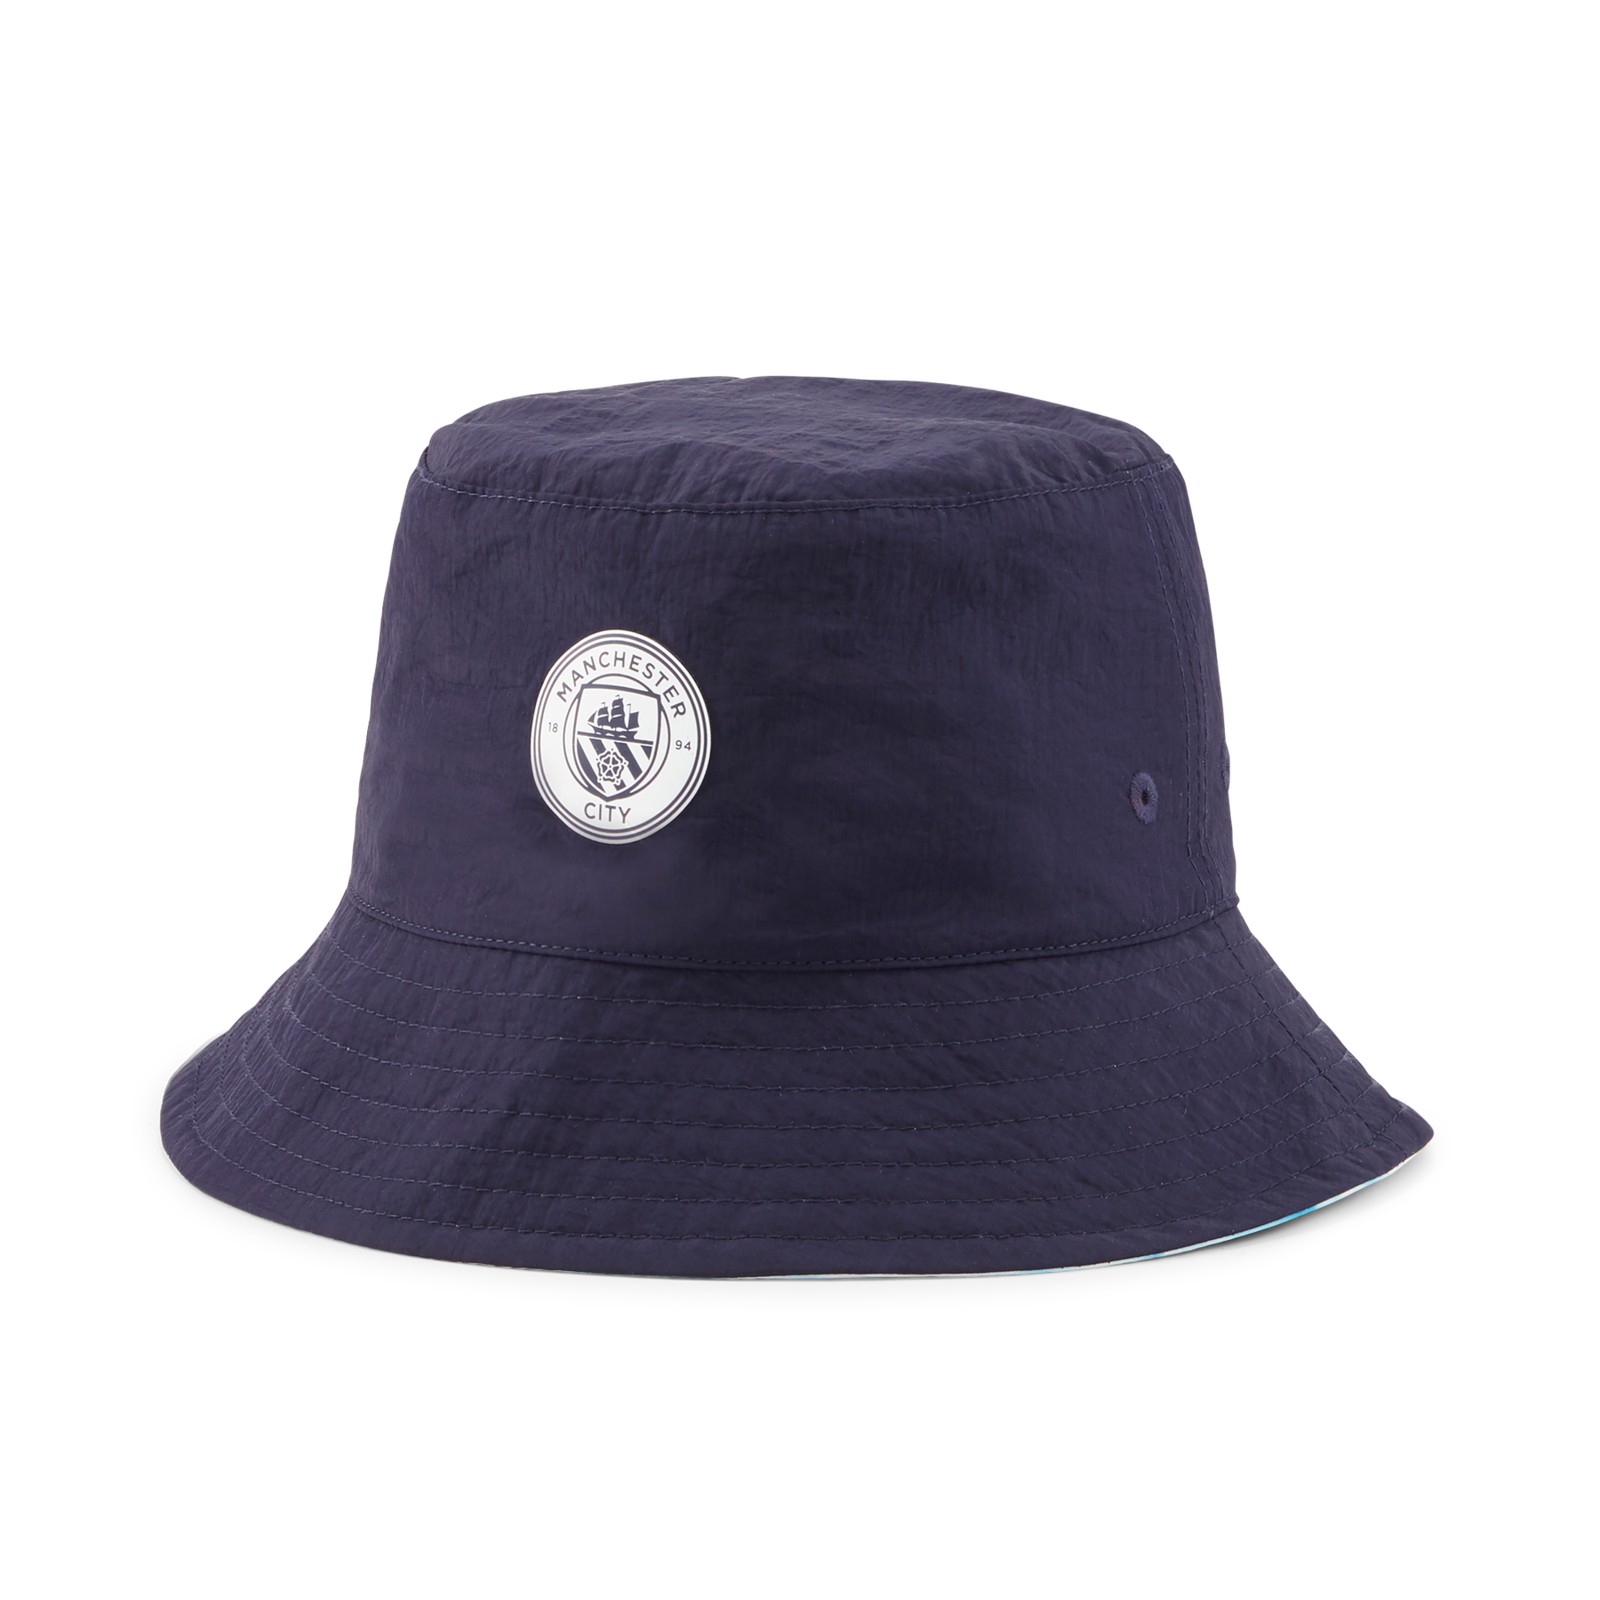 Manchester City Iconic Bucket Hat